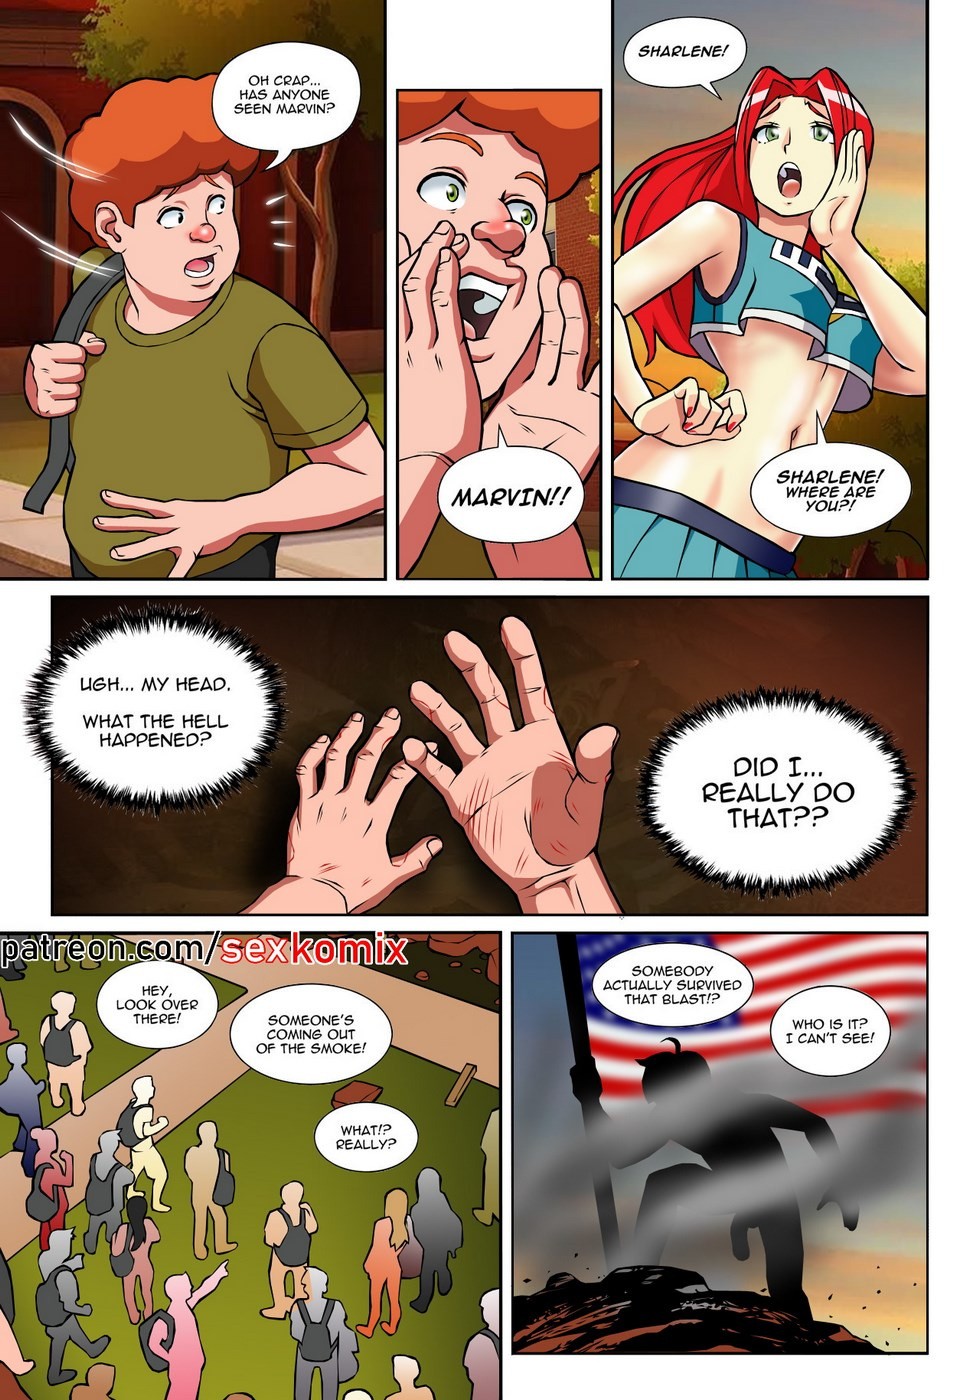 Hot Shit High! - Chapter 1 porn comic picture 31